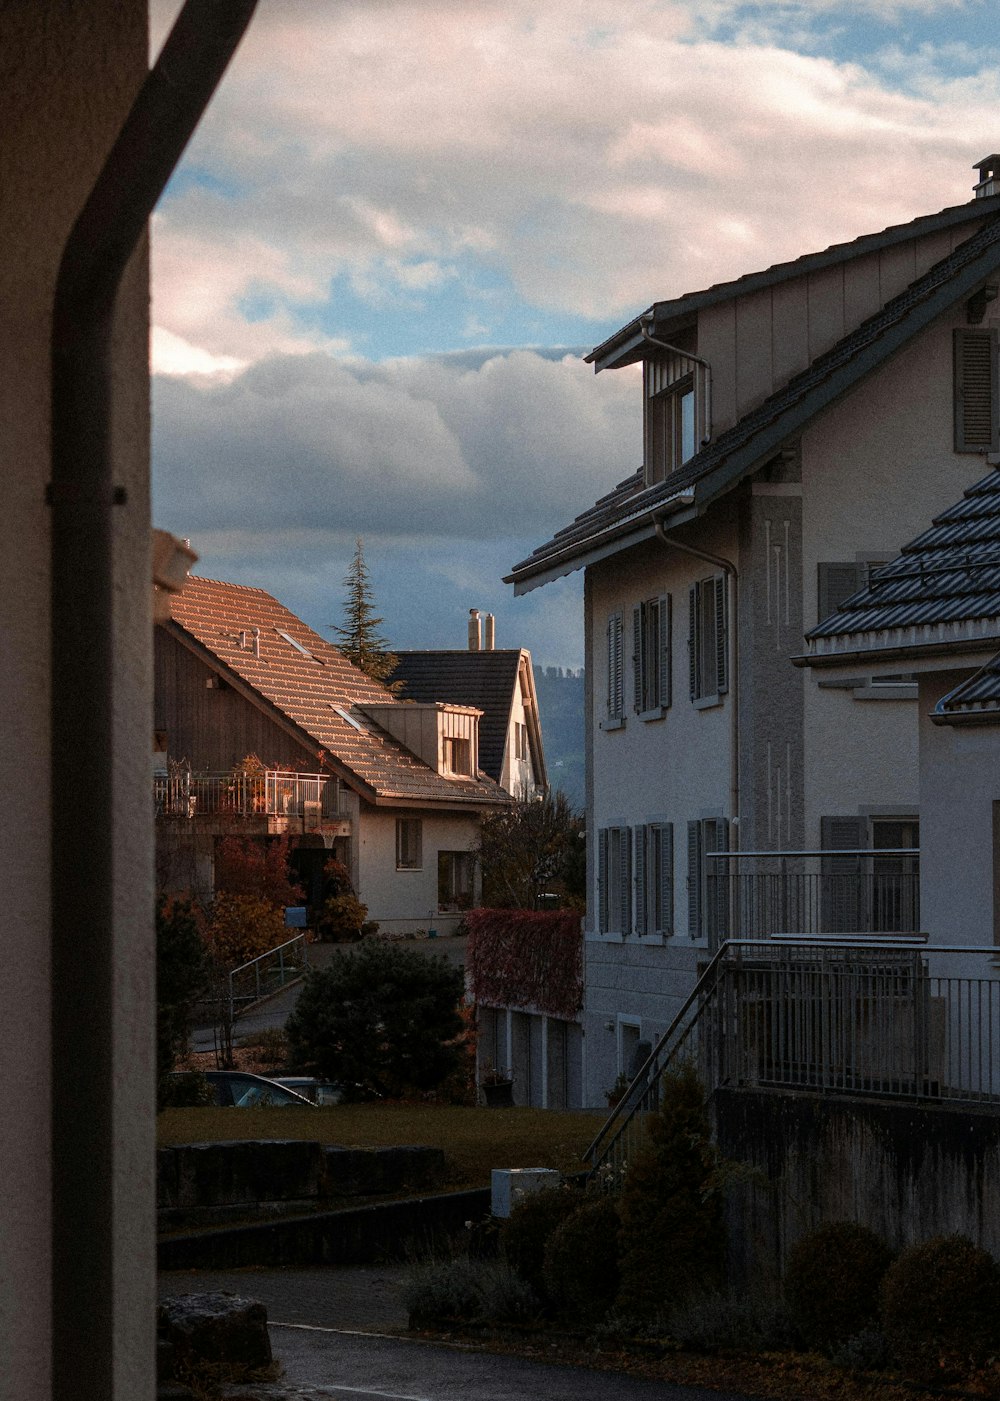 a view of some houses from a window